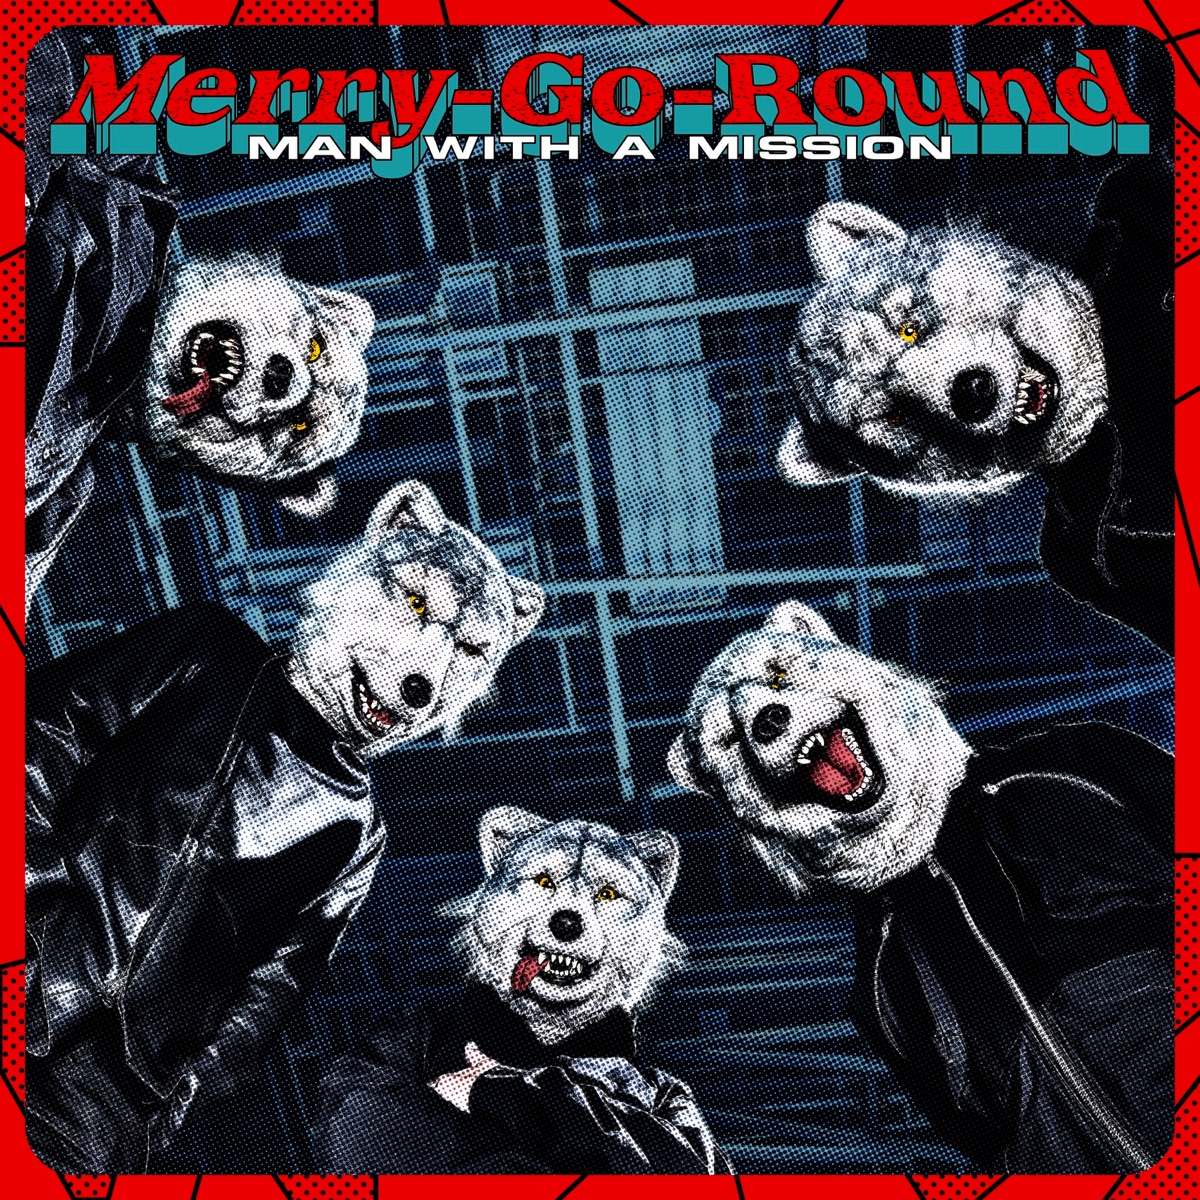 『MAN WITH A MISSION - The Soldiers From The Start』収録の『Break and Cross the Walls Ⅱ』ジャケット